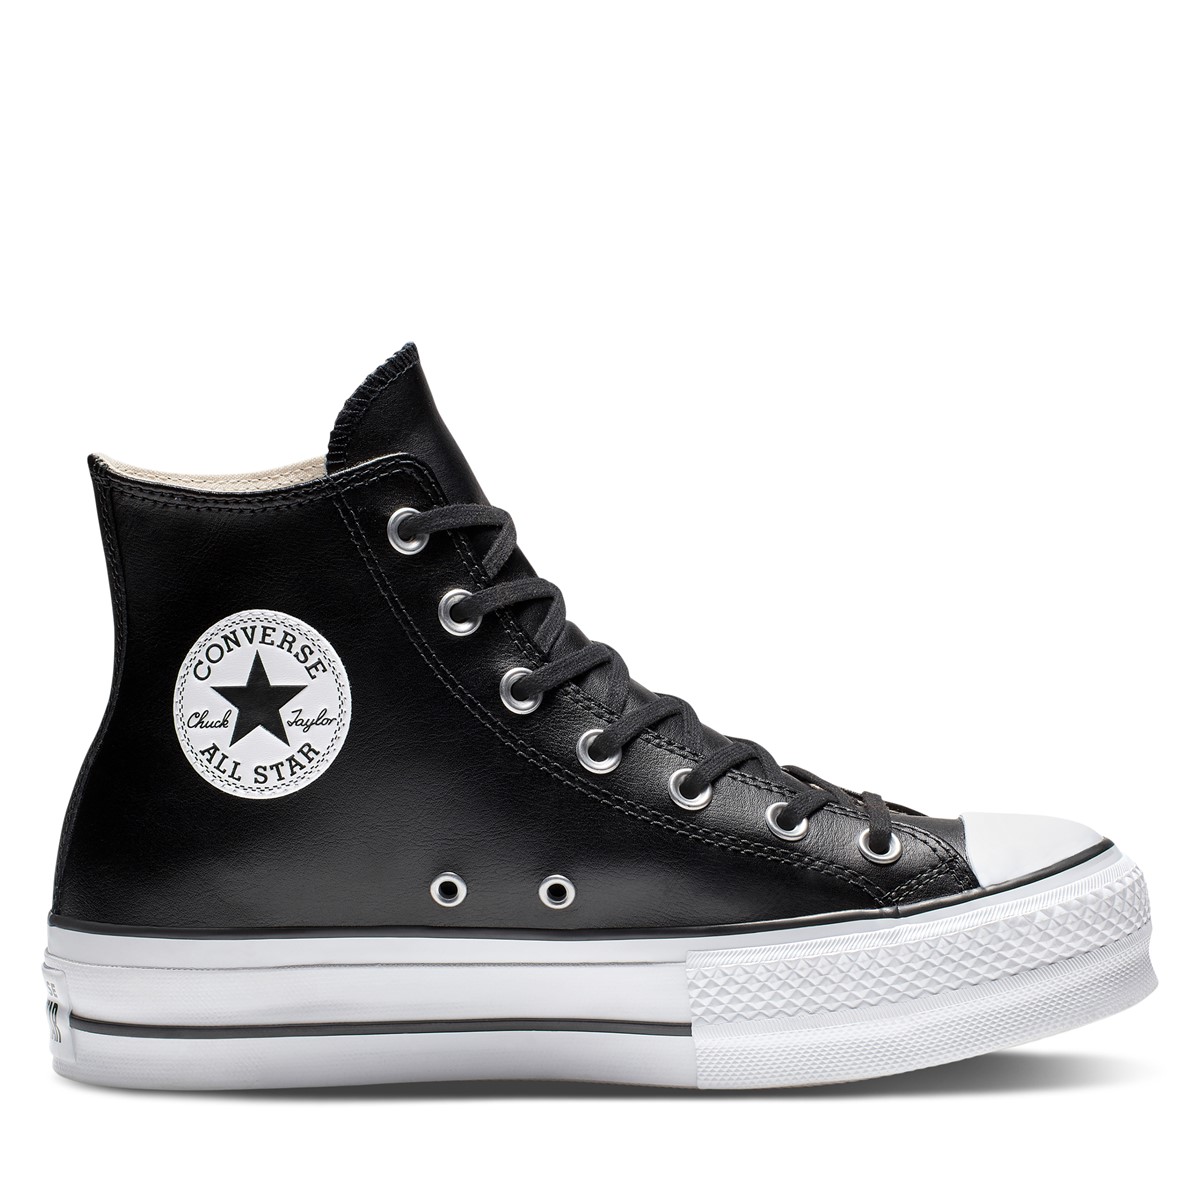 Chuck Taylor All Star Leather Lift Hi Sneakers in Black